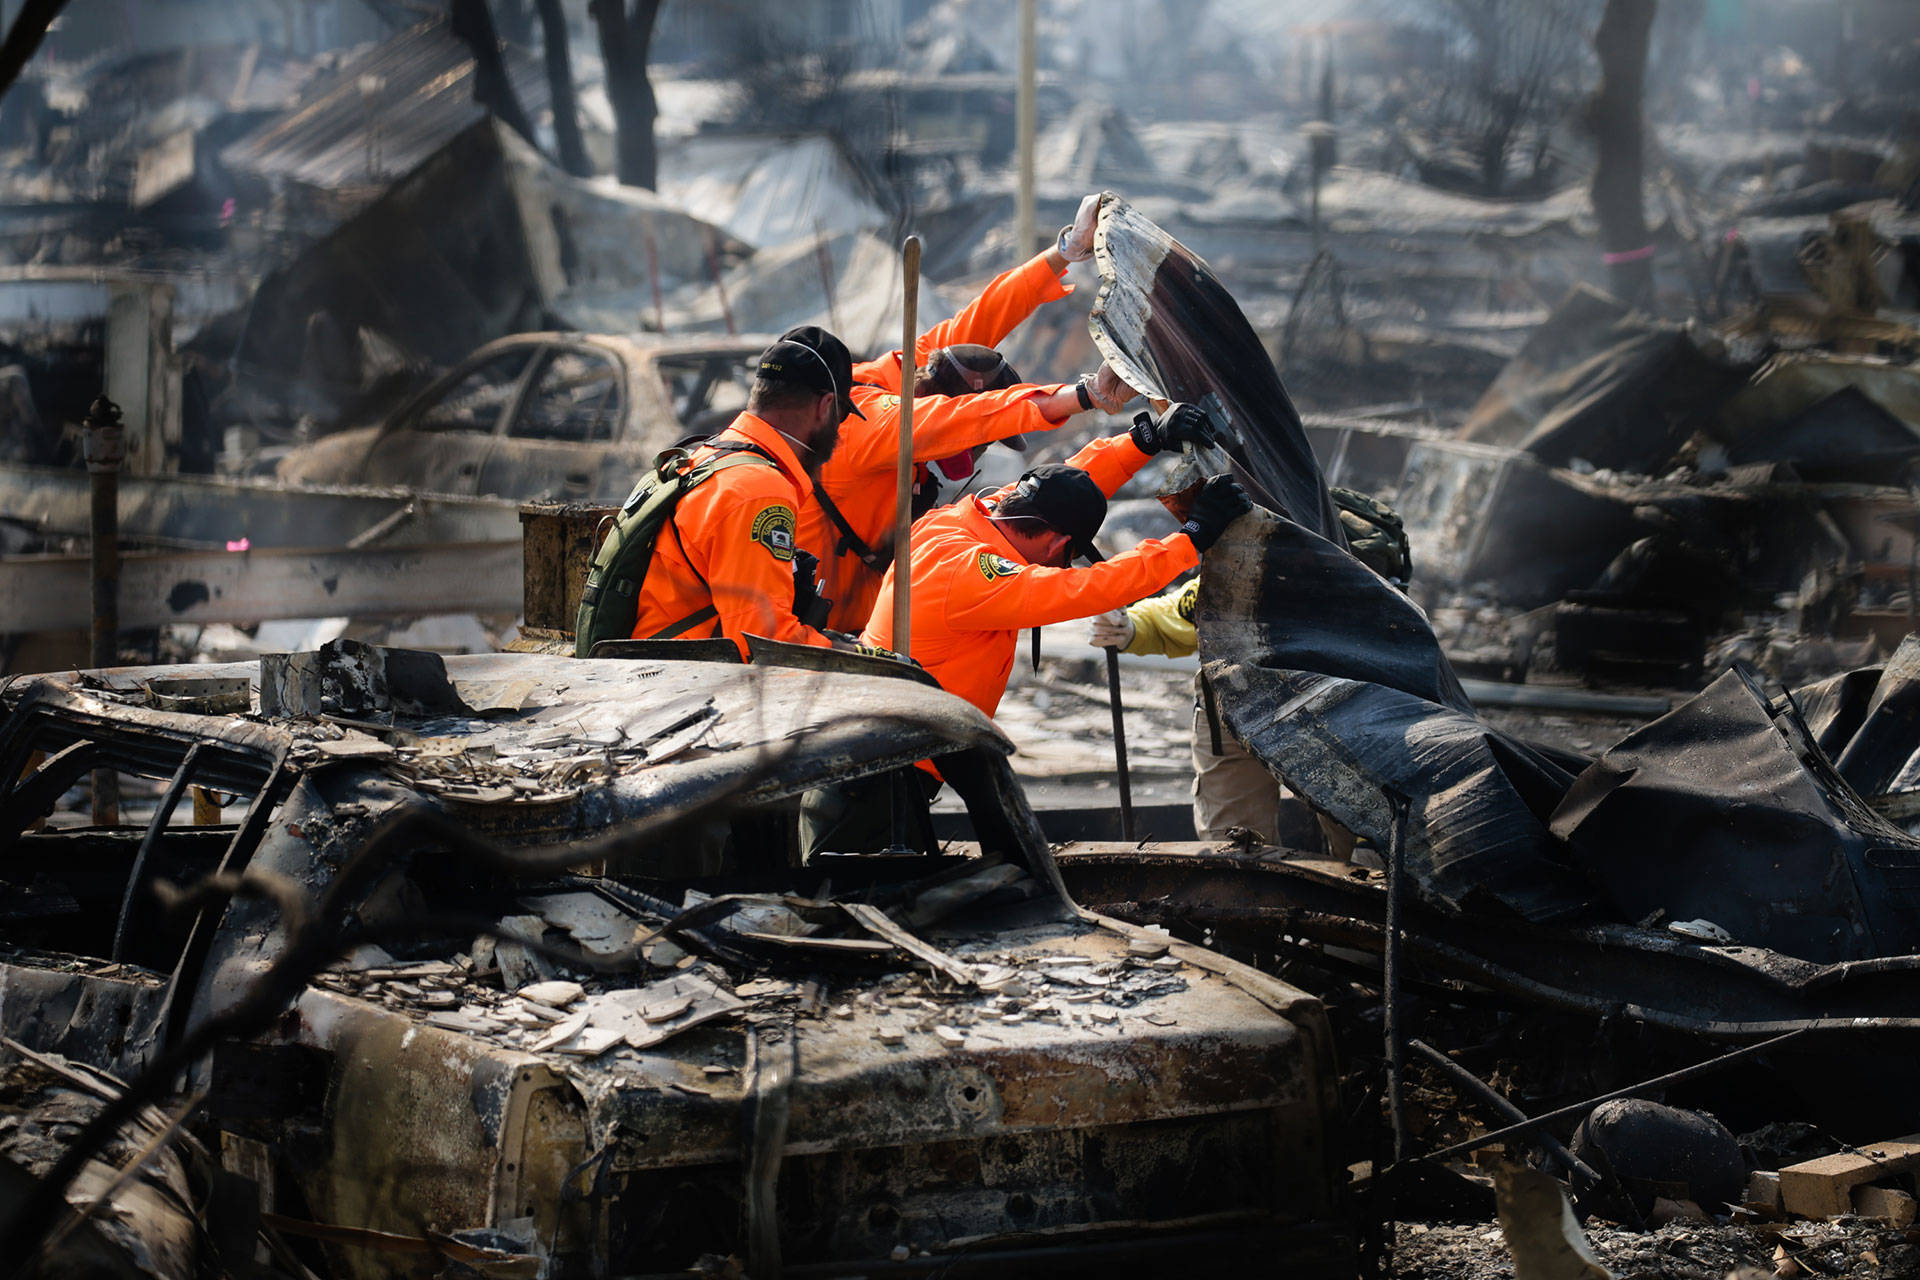 Search and Rescue personnel look for human remains in the Journey's End Mobile Home park following the Tubbs Fire on Oct. 13, 2017 in Santa Rosa. Elijah Nouvelage/Getty Images